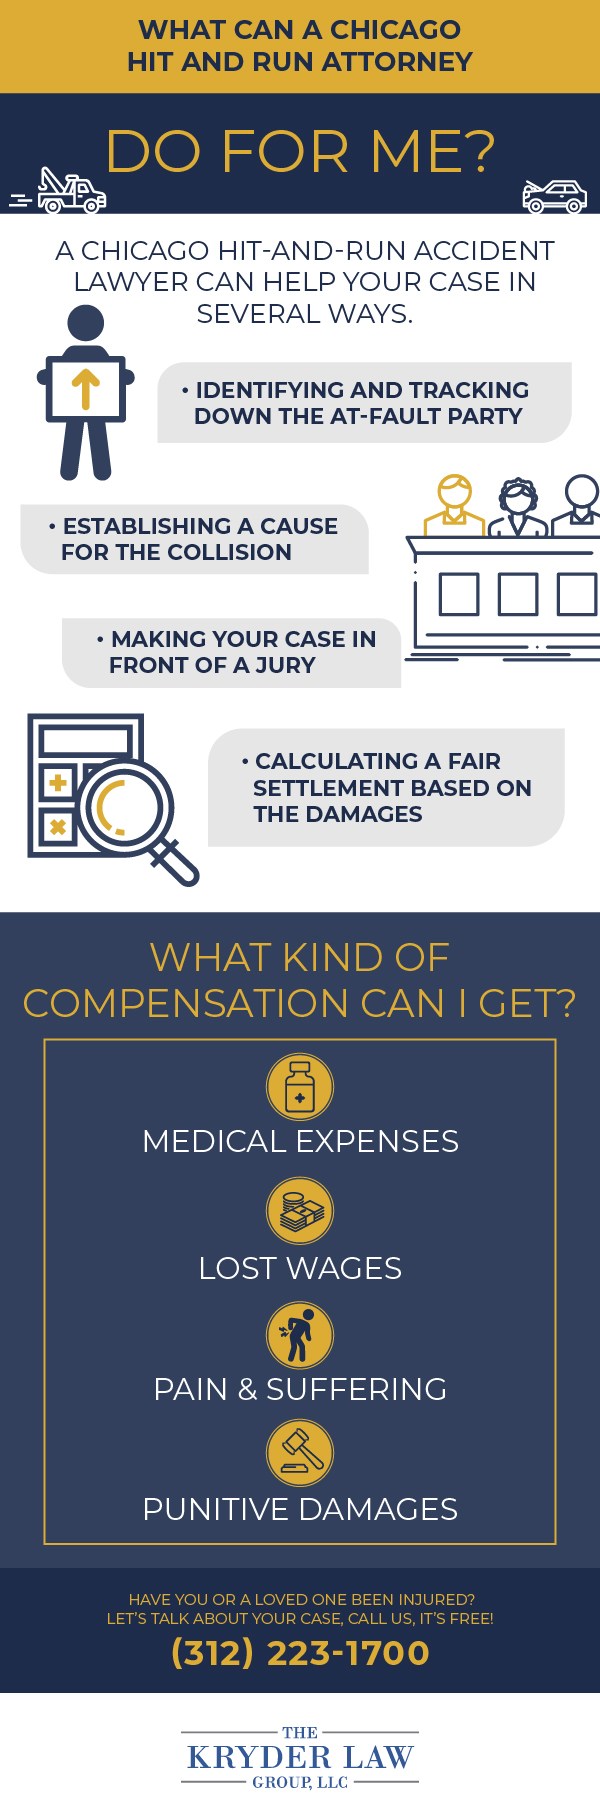 What Can a Chicago Hit and Run Lawyer Do for Me Infographic